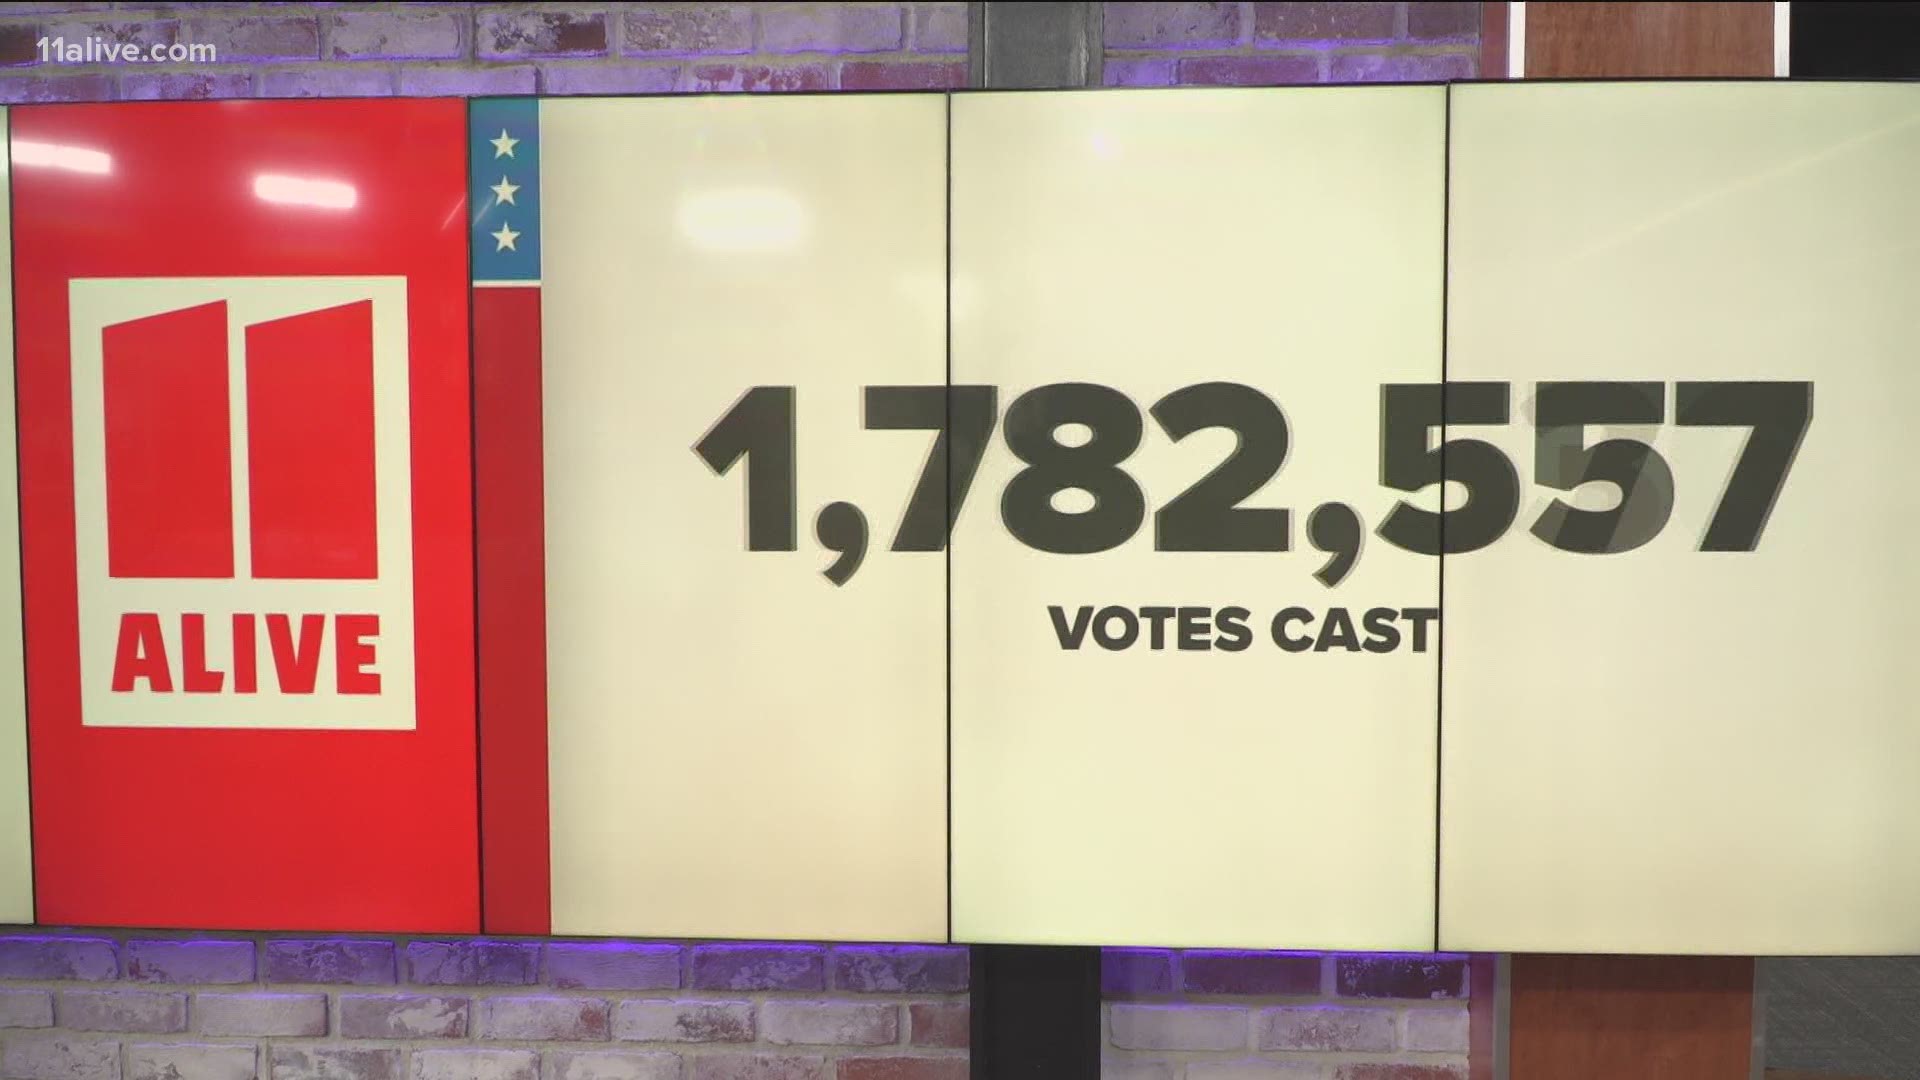 According to state data following Monday's round of early voting, 1,777,947 total votes have already been cast in Georgia.